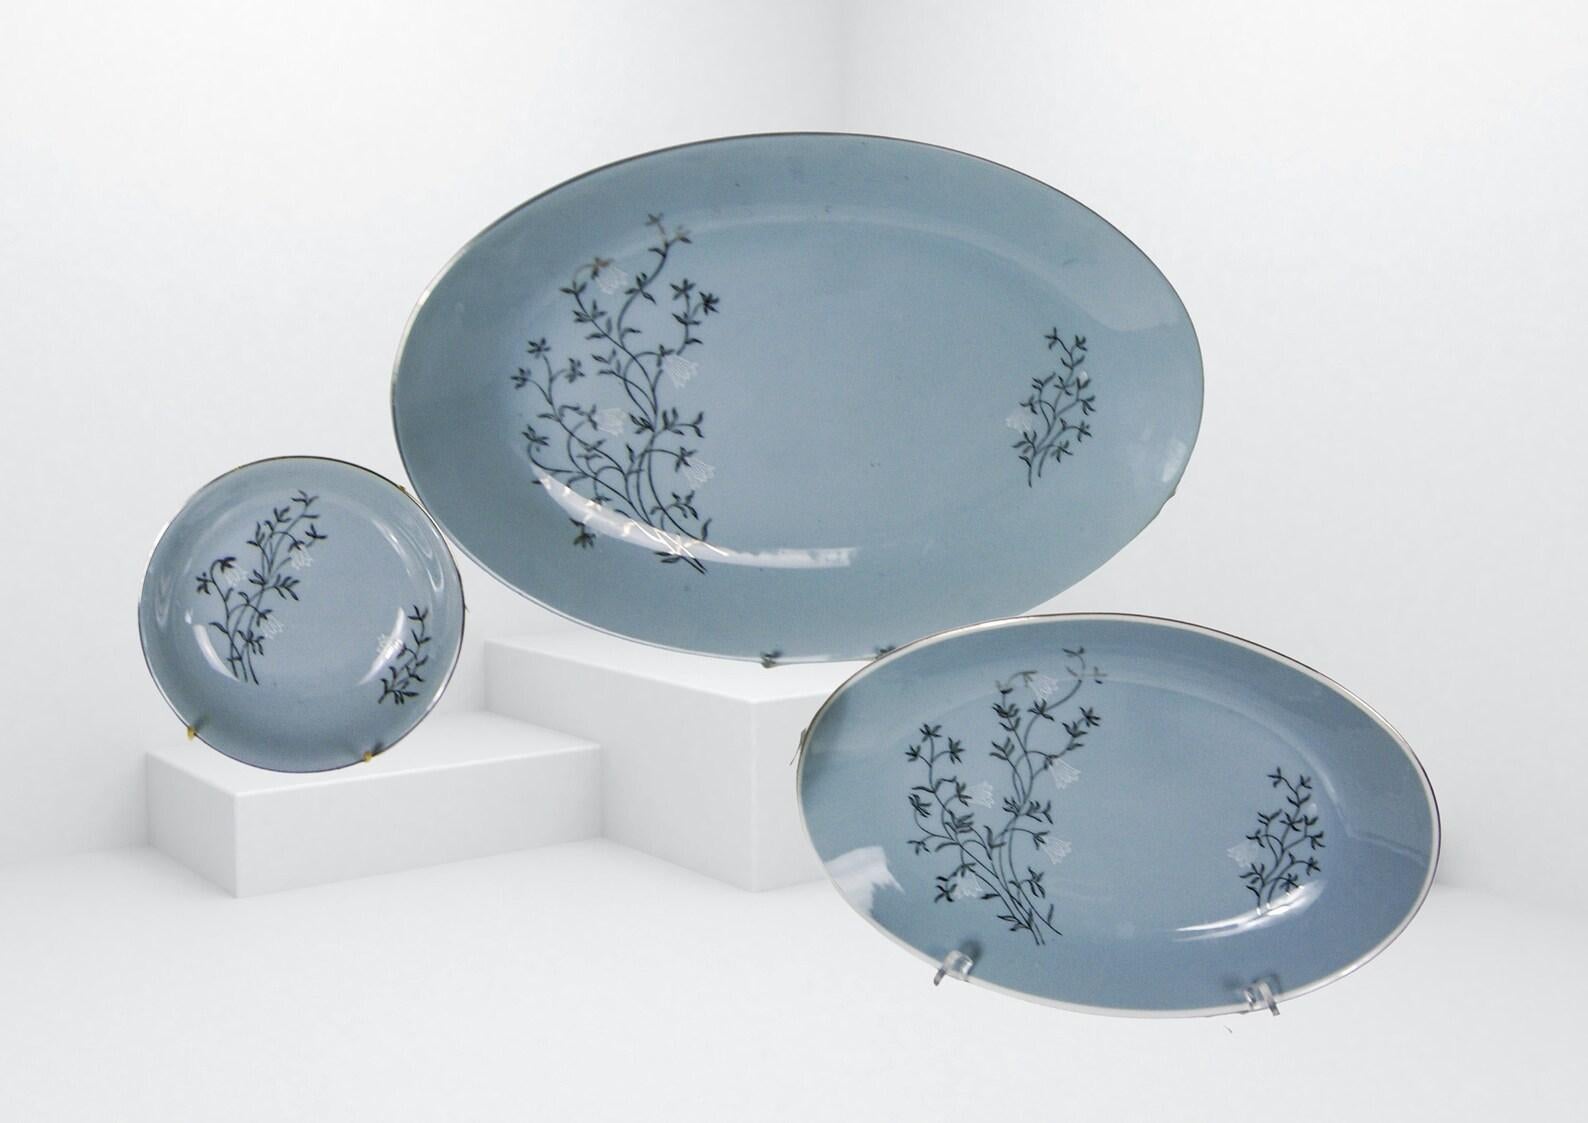 1940s SGK Japan dinnerware set.
Occupied Japan import.
Beautiful oval shaped serving dishes.
In lush duck egg blue colour outlined in black and white leafy trails and silver edges.

Consists of:
1 large oval shaped serving platter,
1 medium